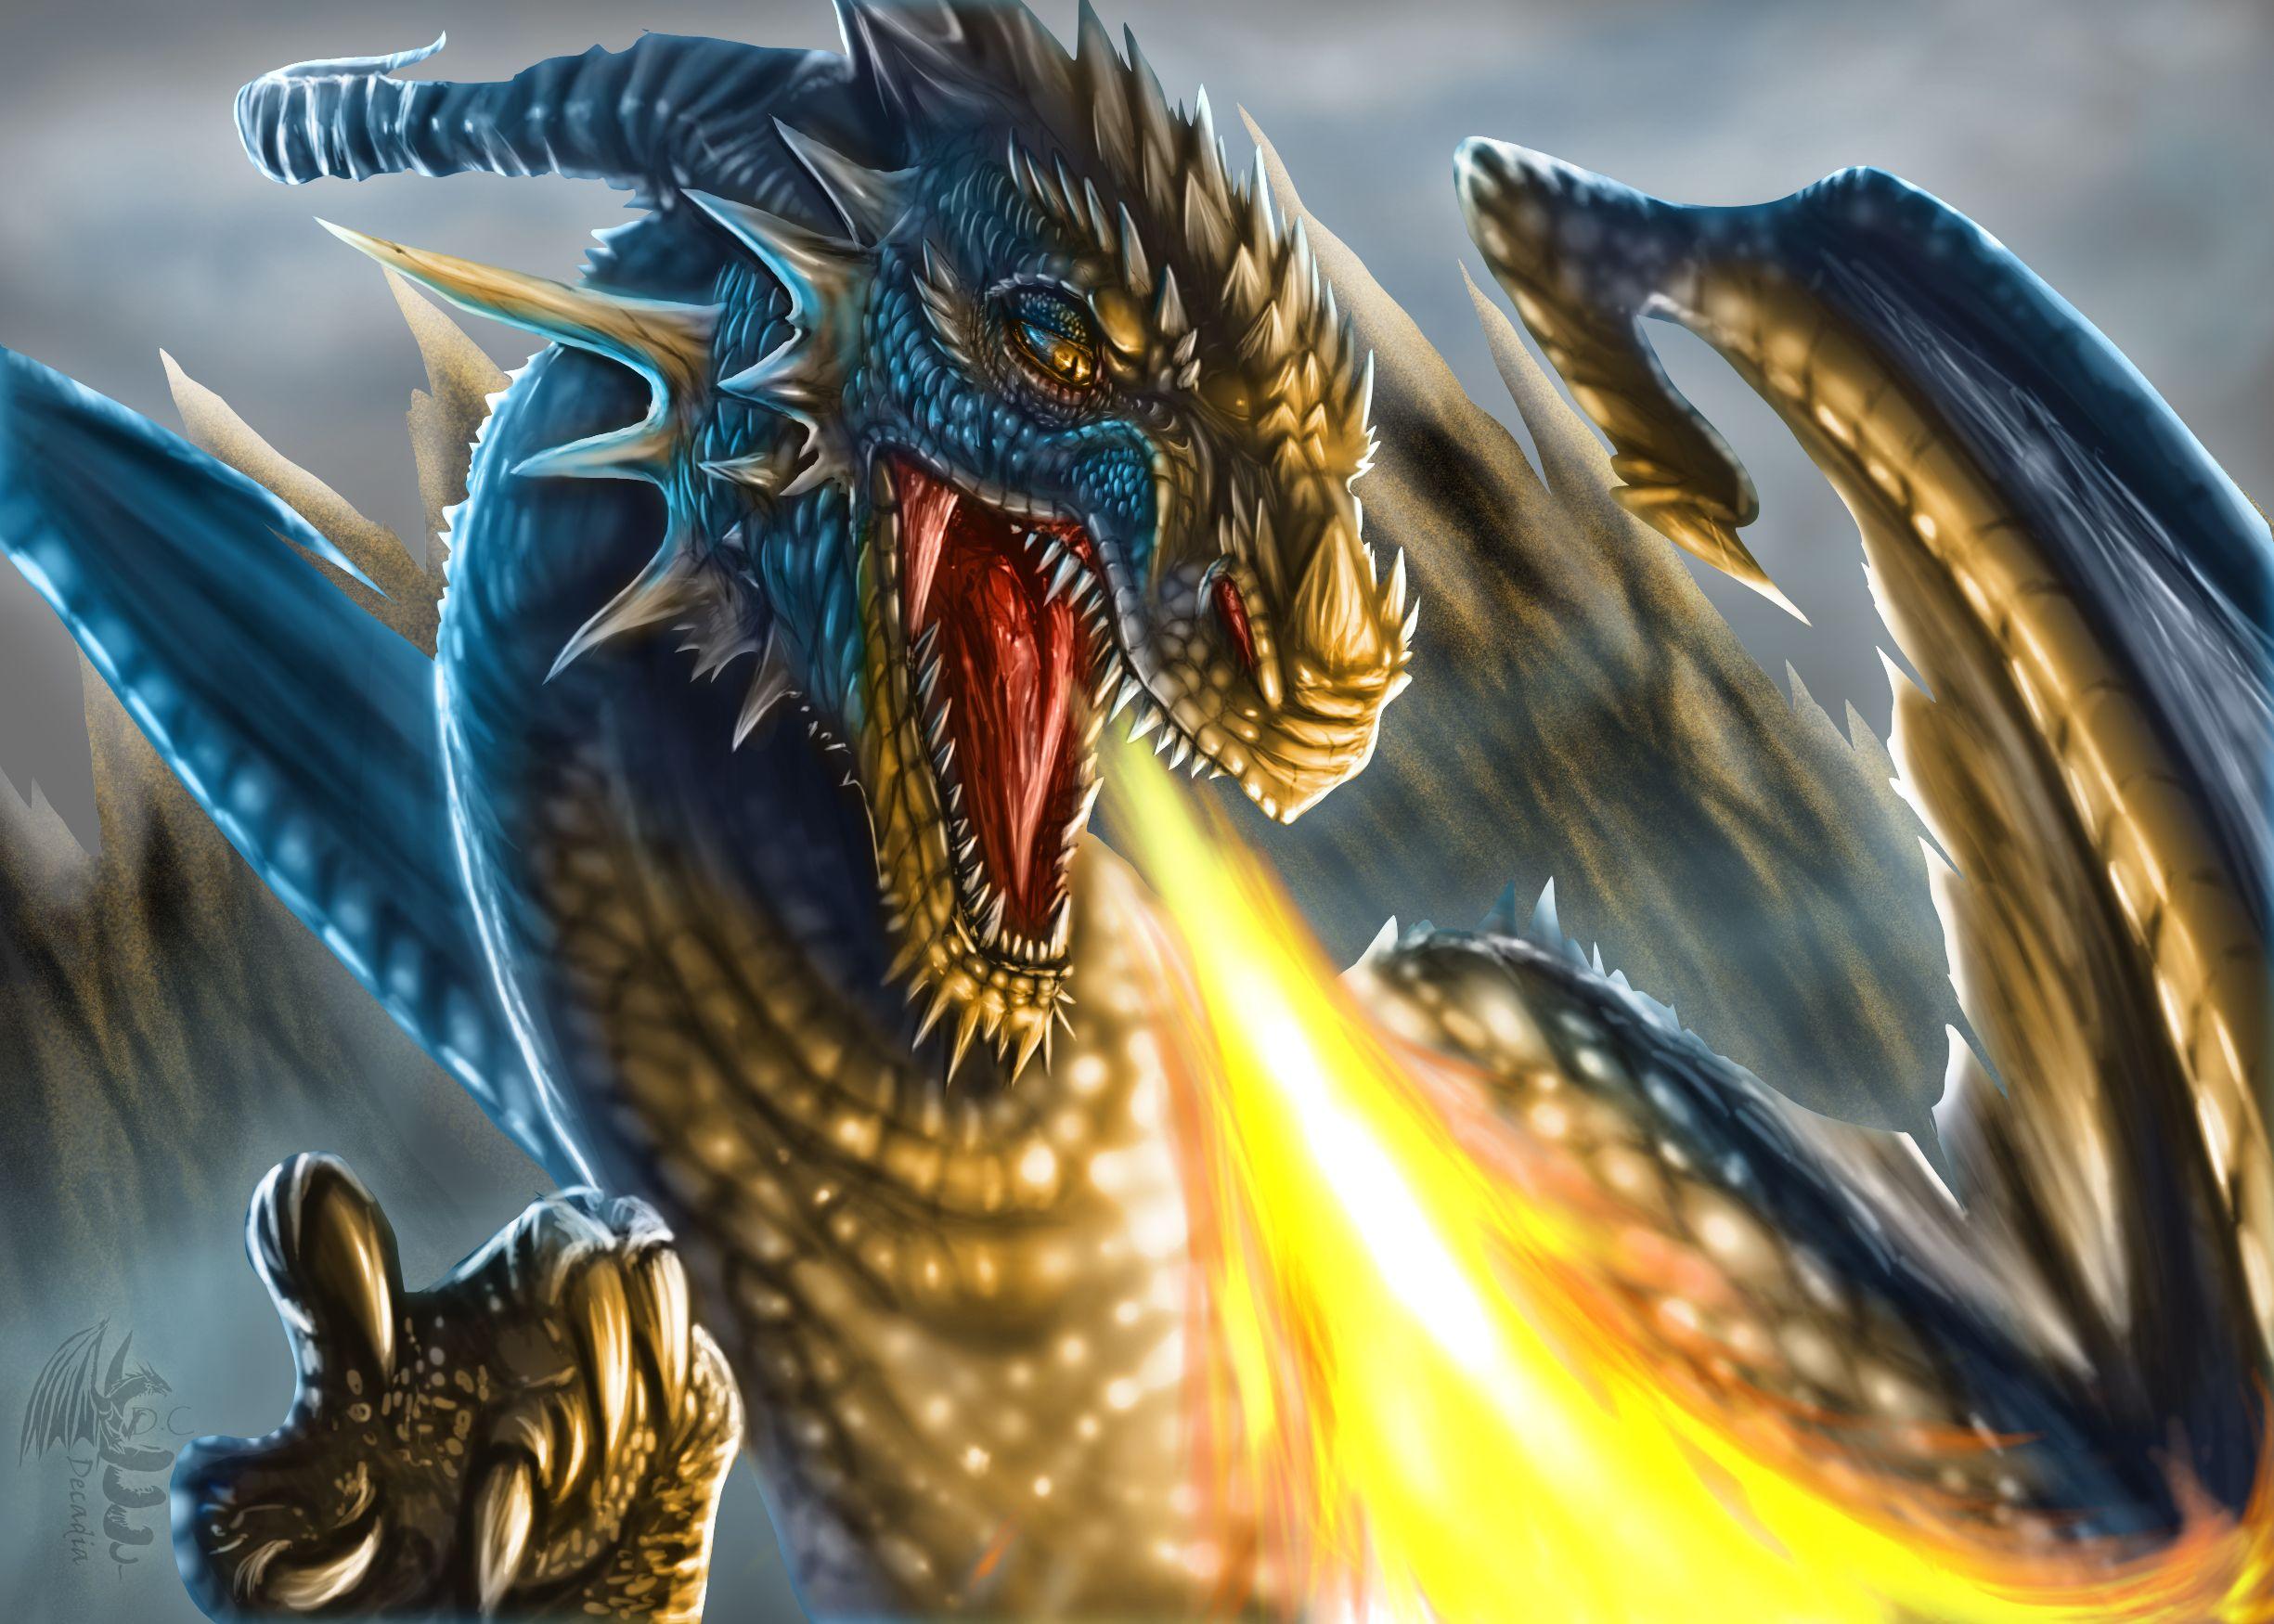 Angry Fire Breath Dragon wallpaper - Download to mobile phone